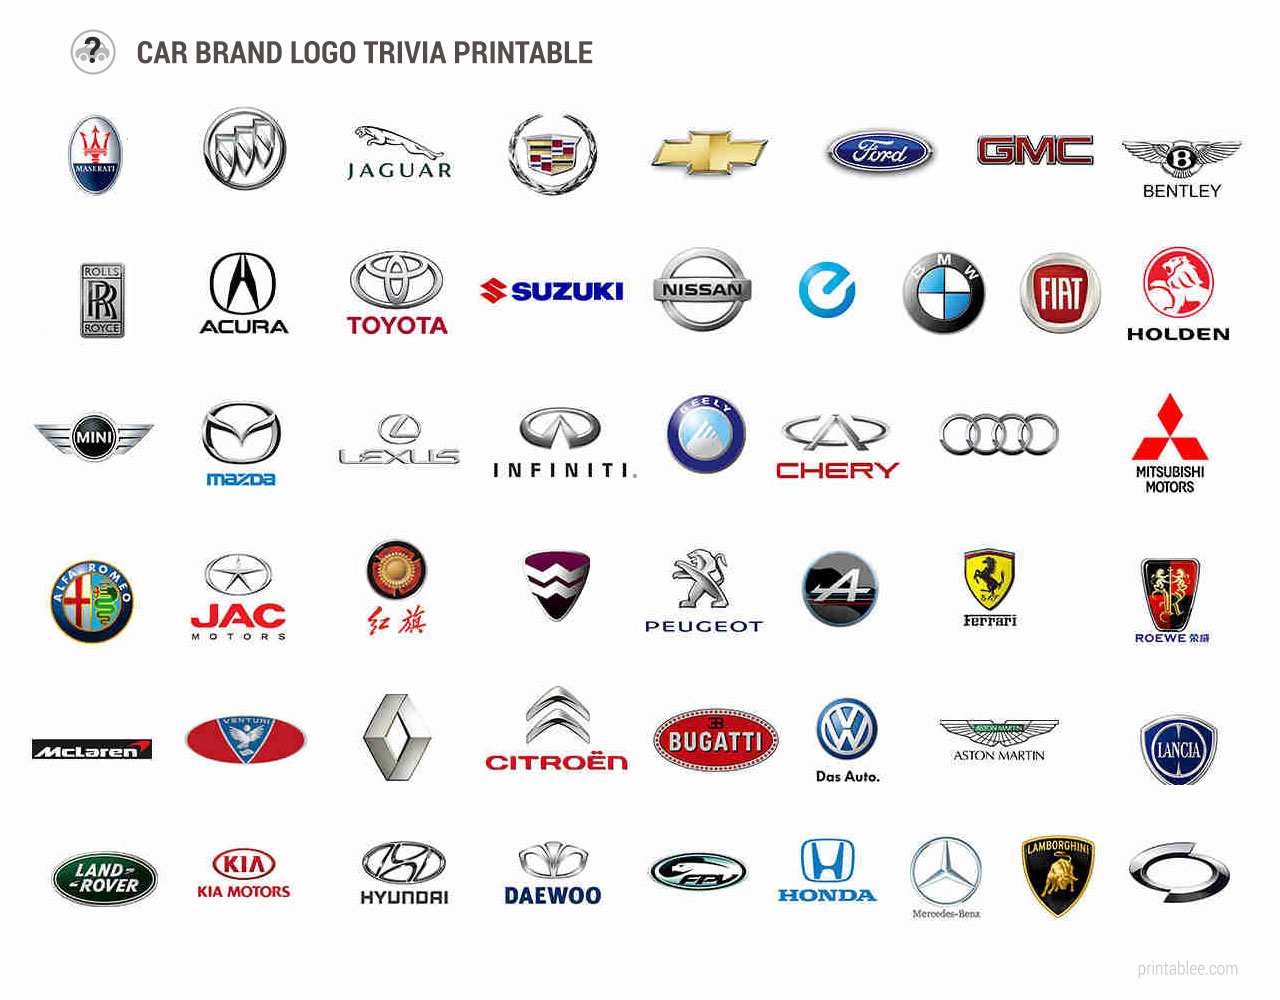 5 Best Images of Logo Trivia Printable - Guess the Logo Quiz Game ...